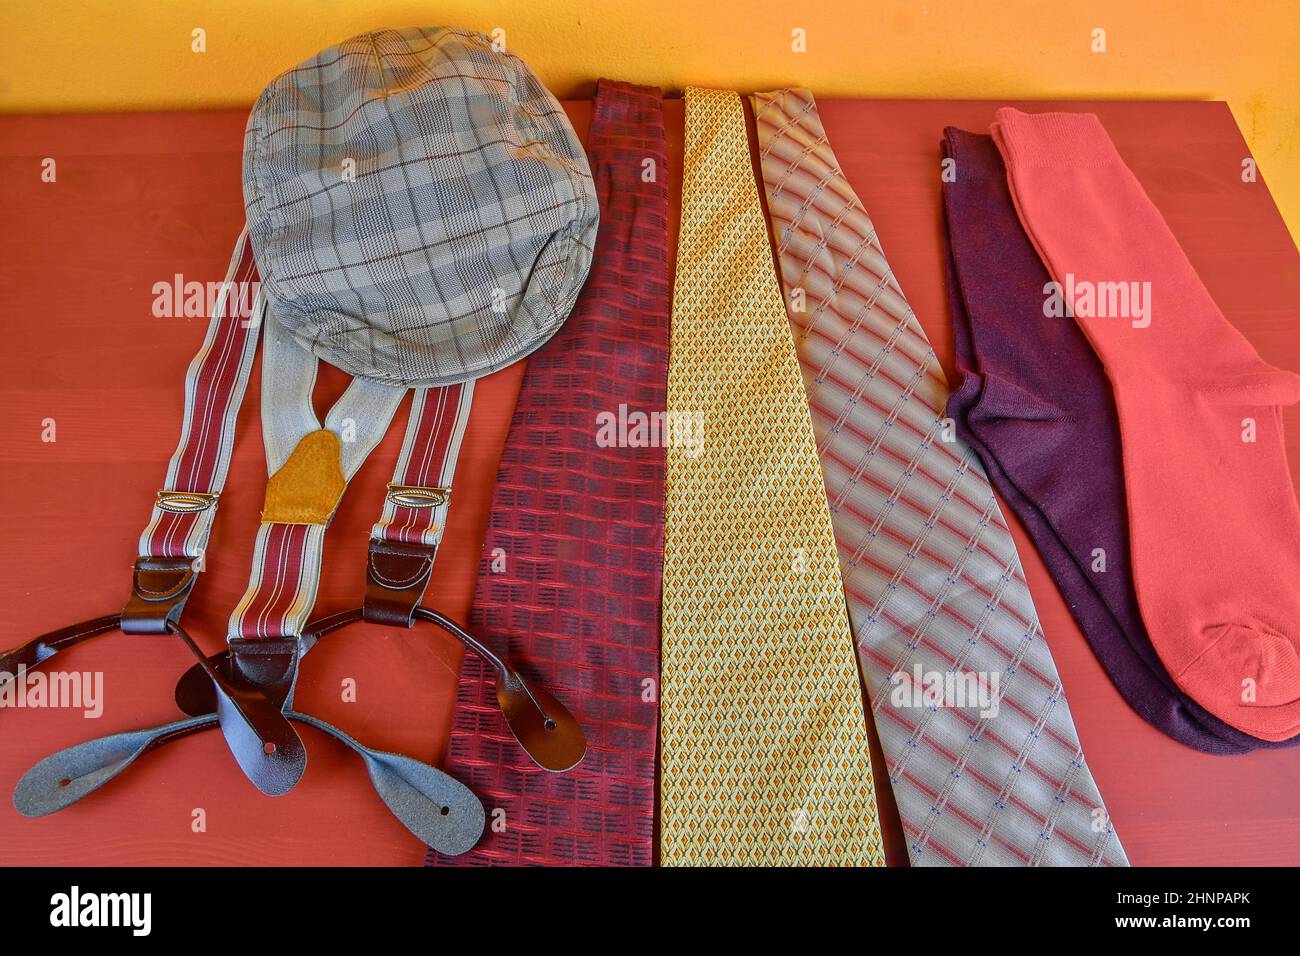 Man garments. Clothing concept for men. Colorful socks, ties, braces and checked flat cap on claret background. Classical concept of men garments. Close-up Stock Photo